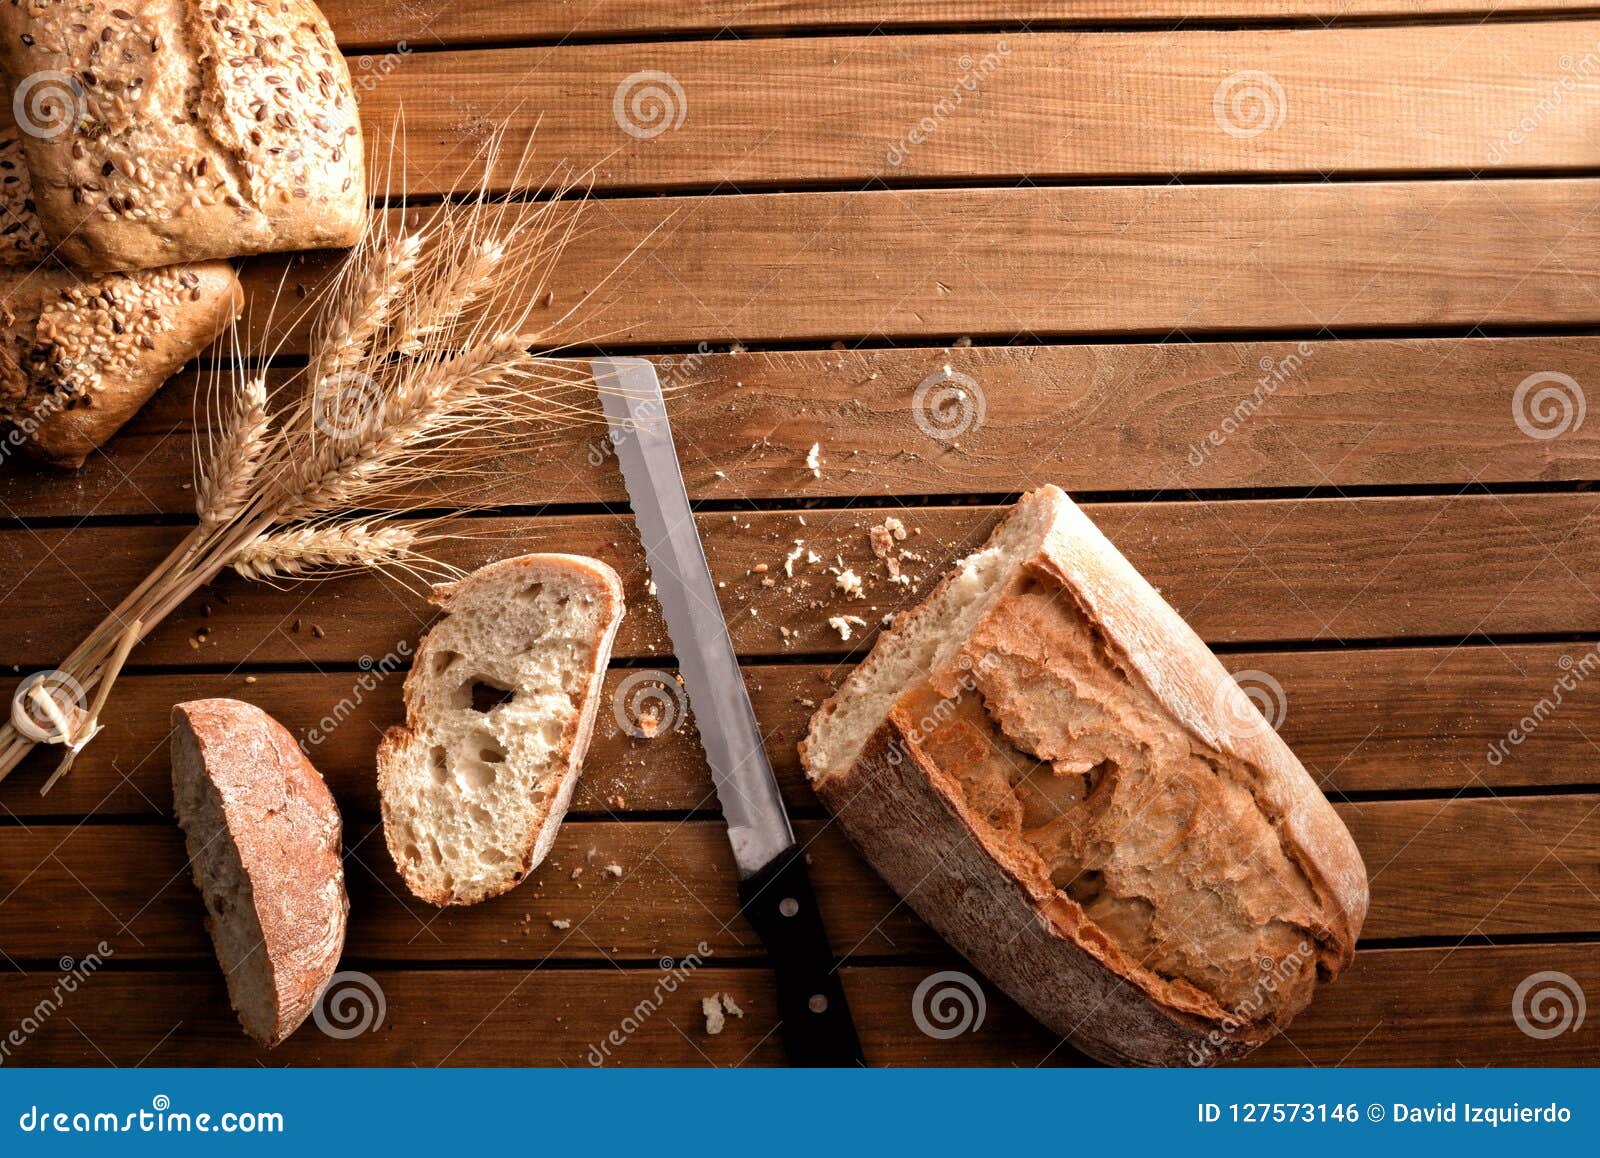 Different Types Of Bread On Rustic Wooden Table Top Dark Stock Photo